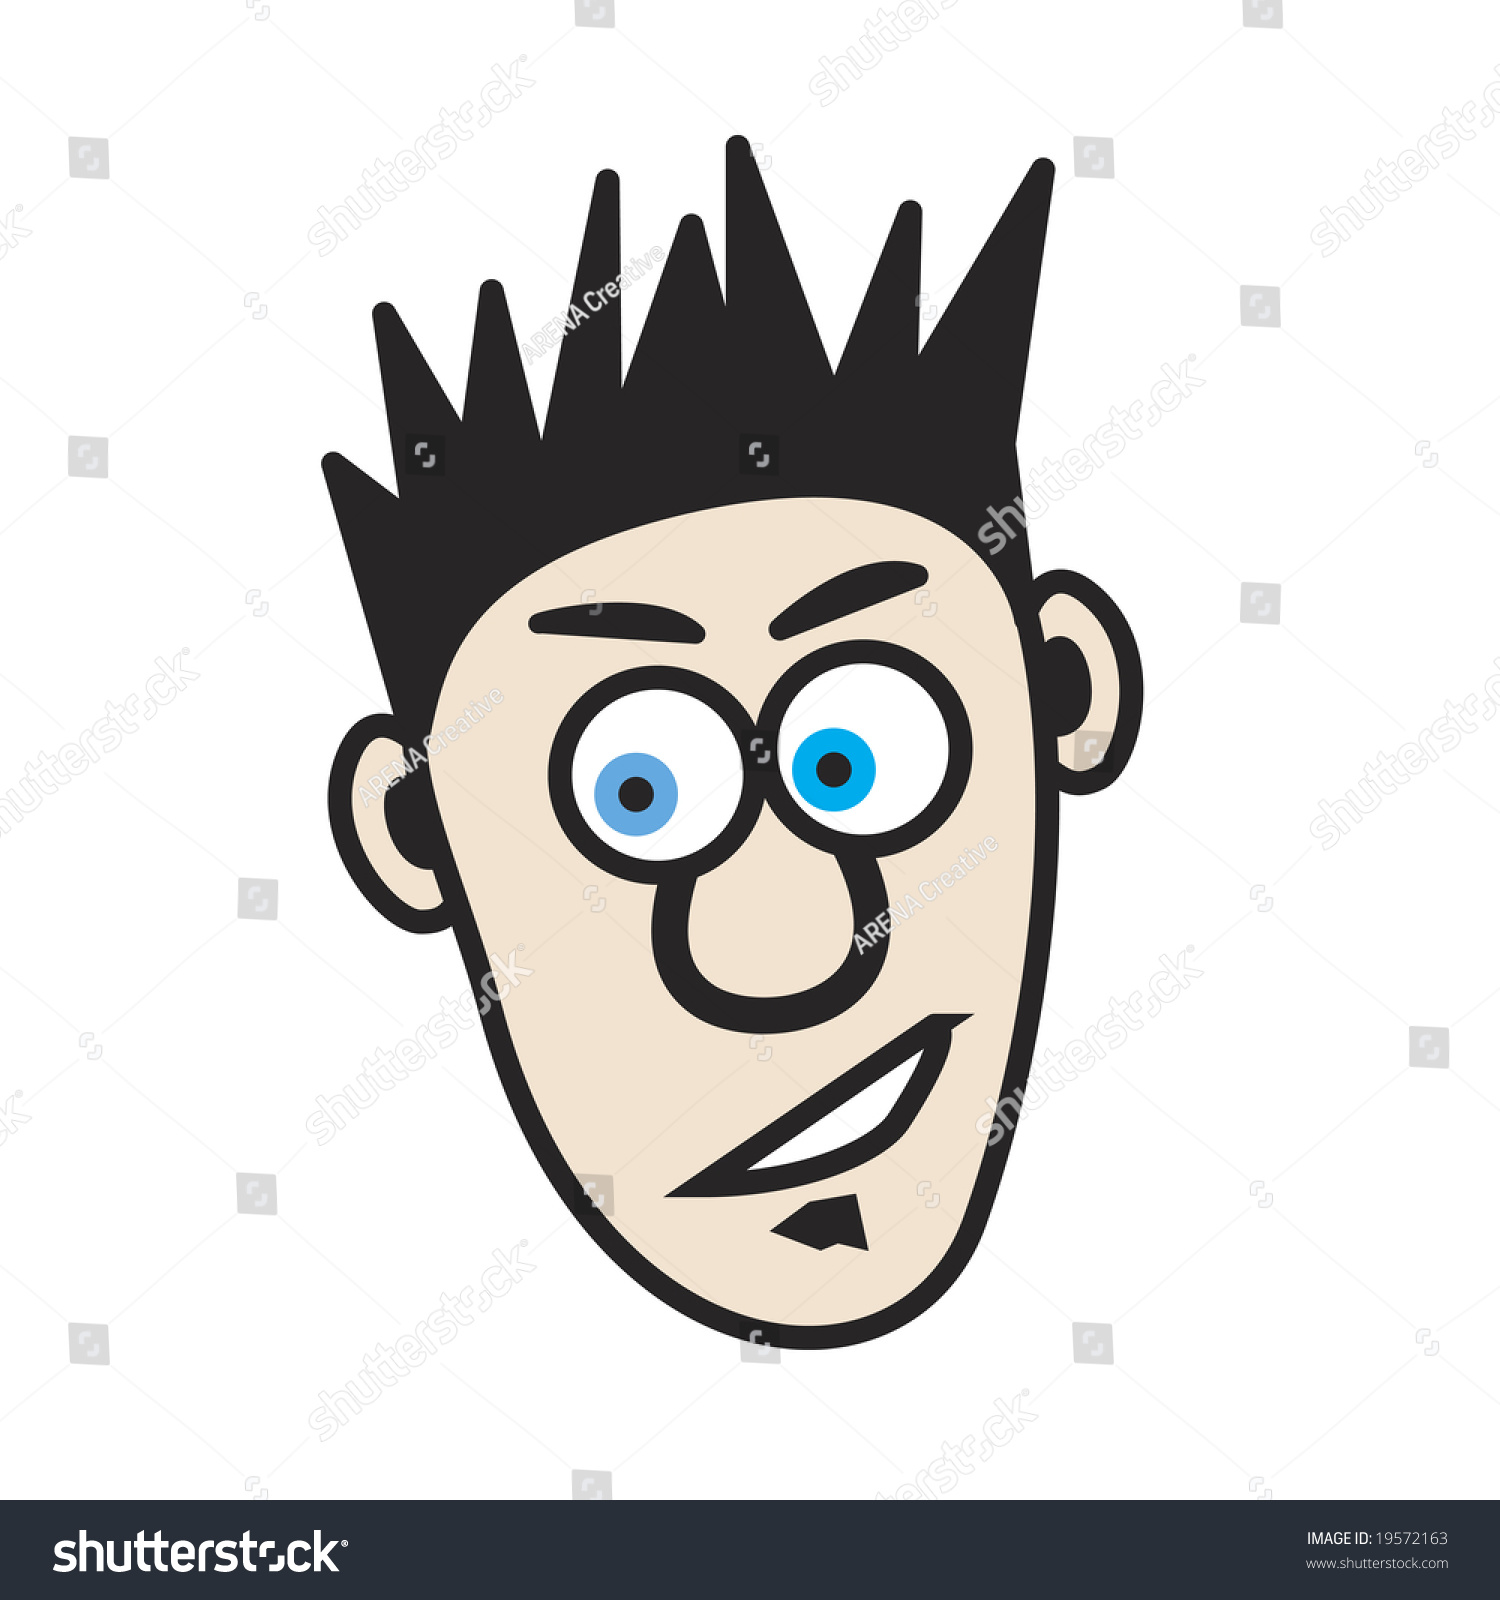 Illustration Of A Young Cartoon Man That Has Spiked Hair And A Soul